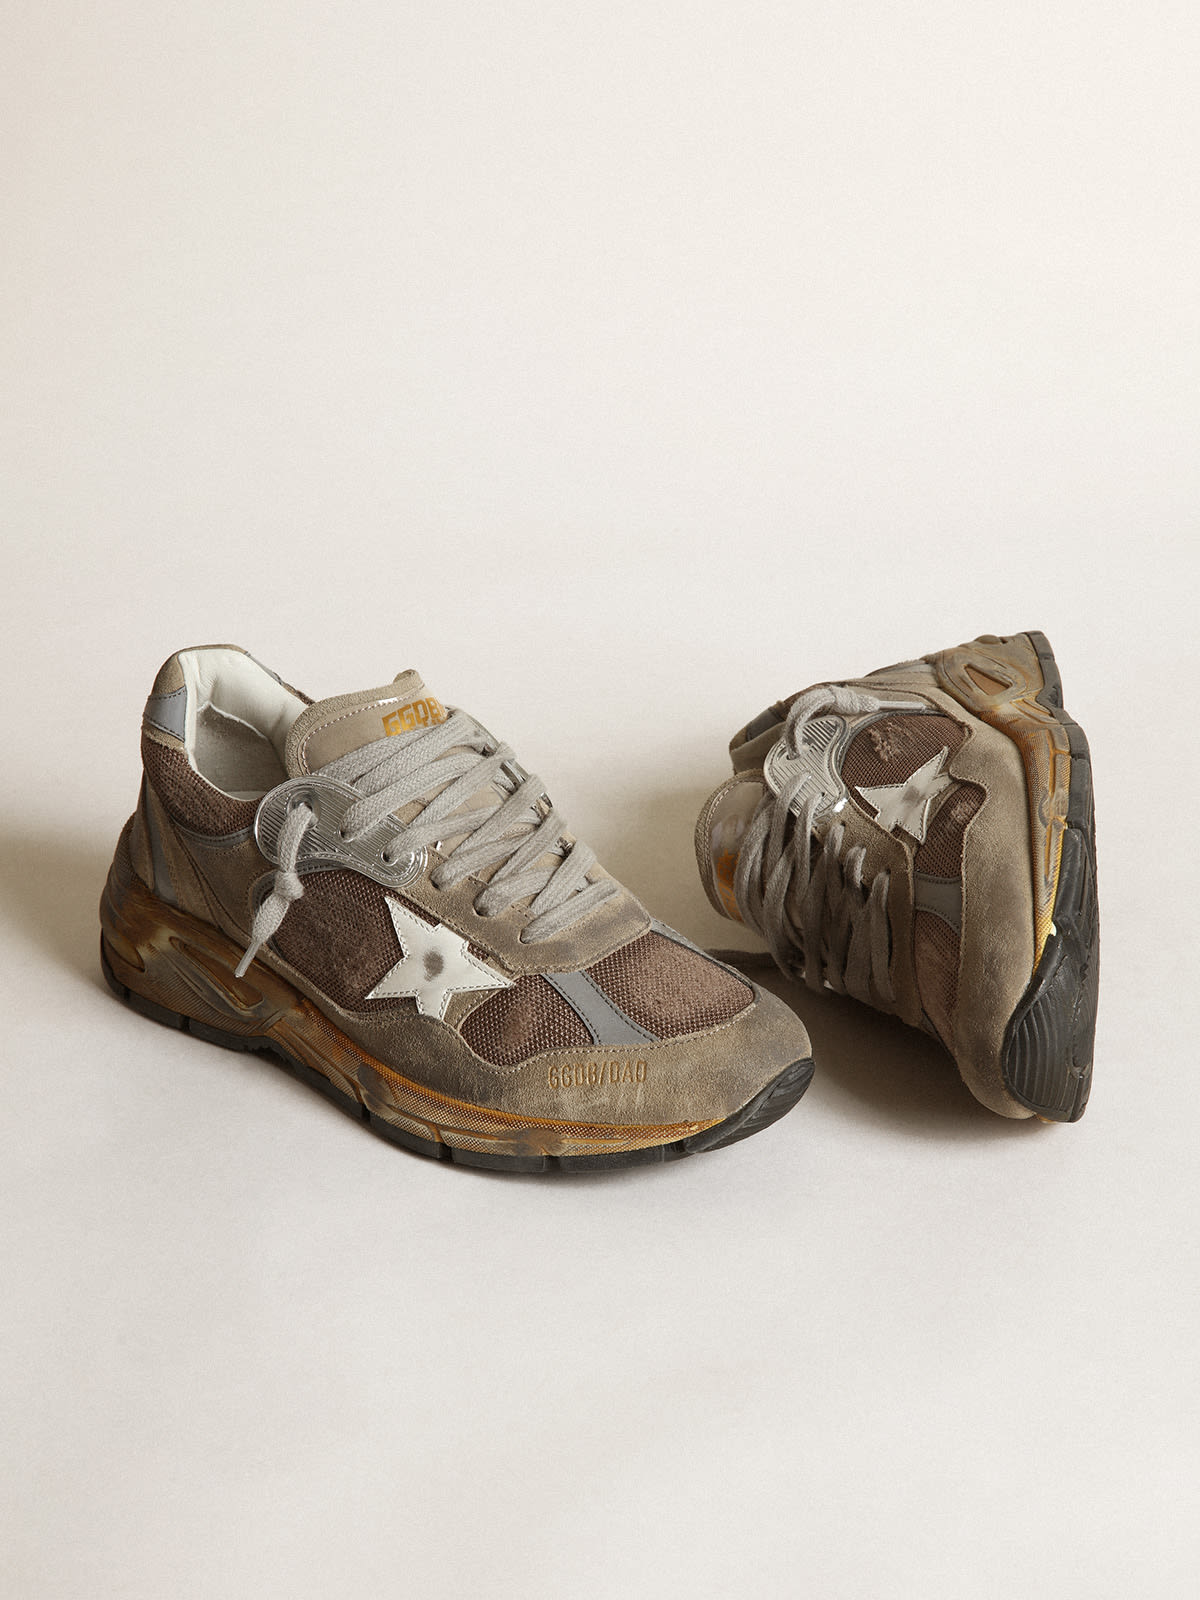 Golden Goose - Women’s Dad-Star sneakers in dove-gray mesh and suede with white leather star in 